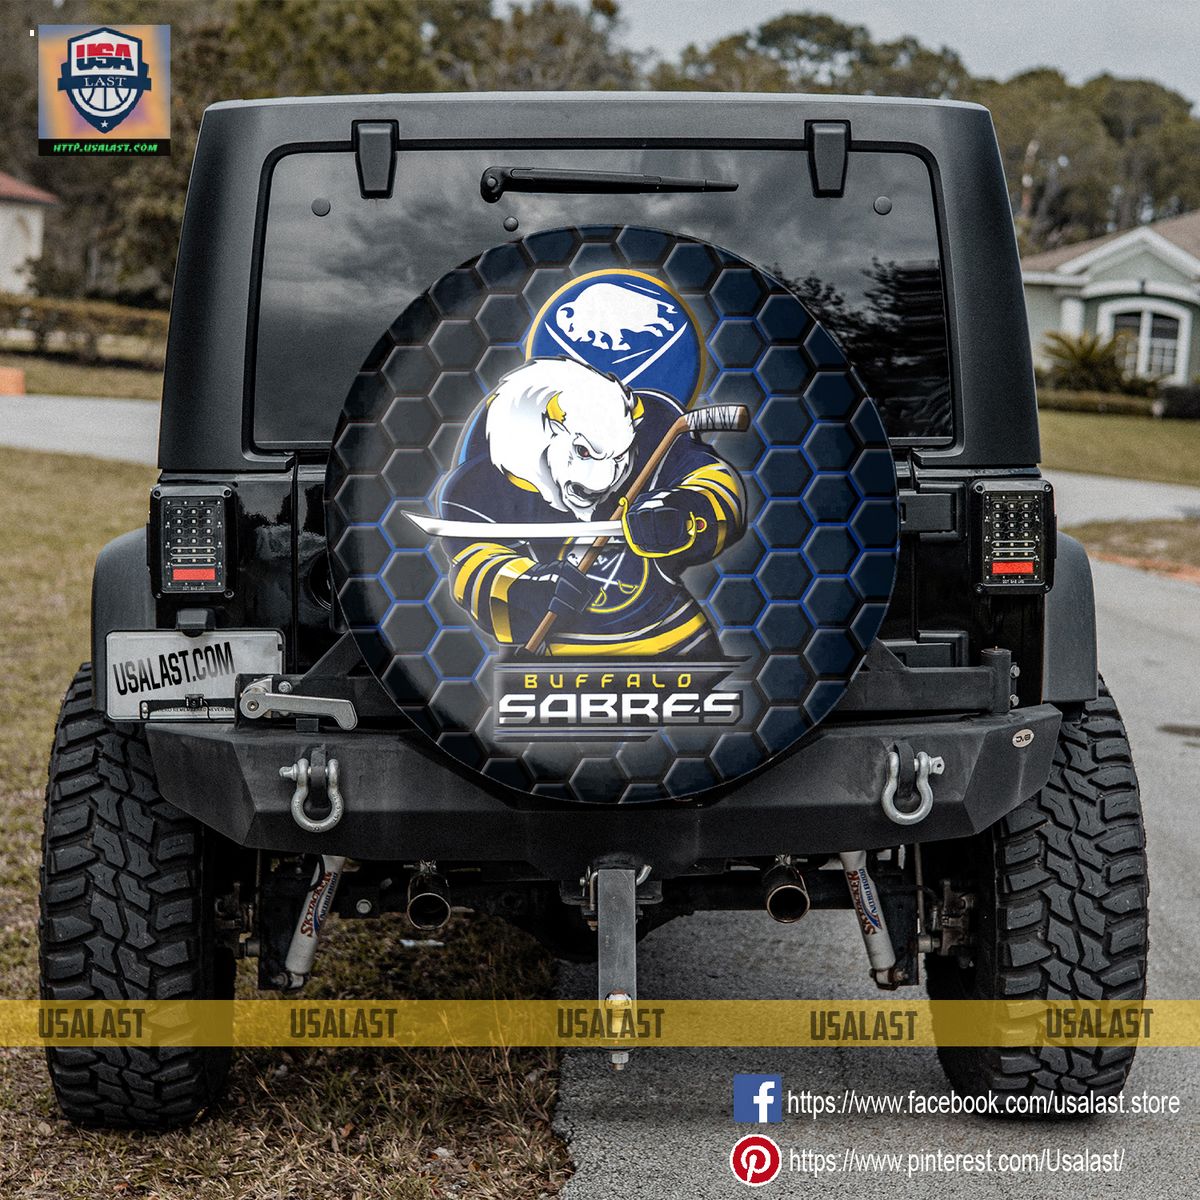 Buffalo Sabres MLB Mascot Spare Tire Cover - Natural and awesome